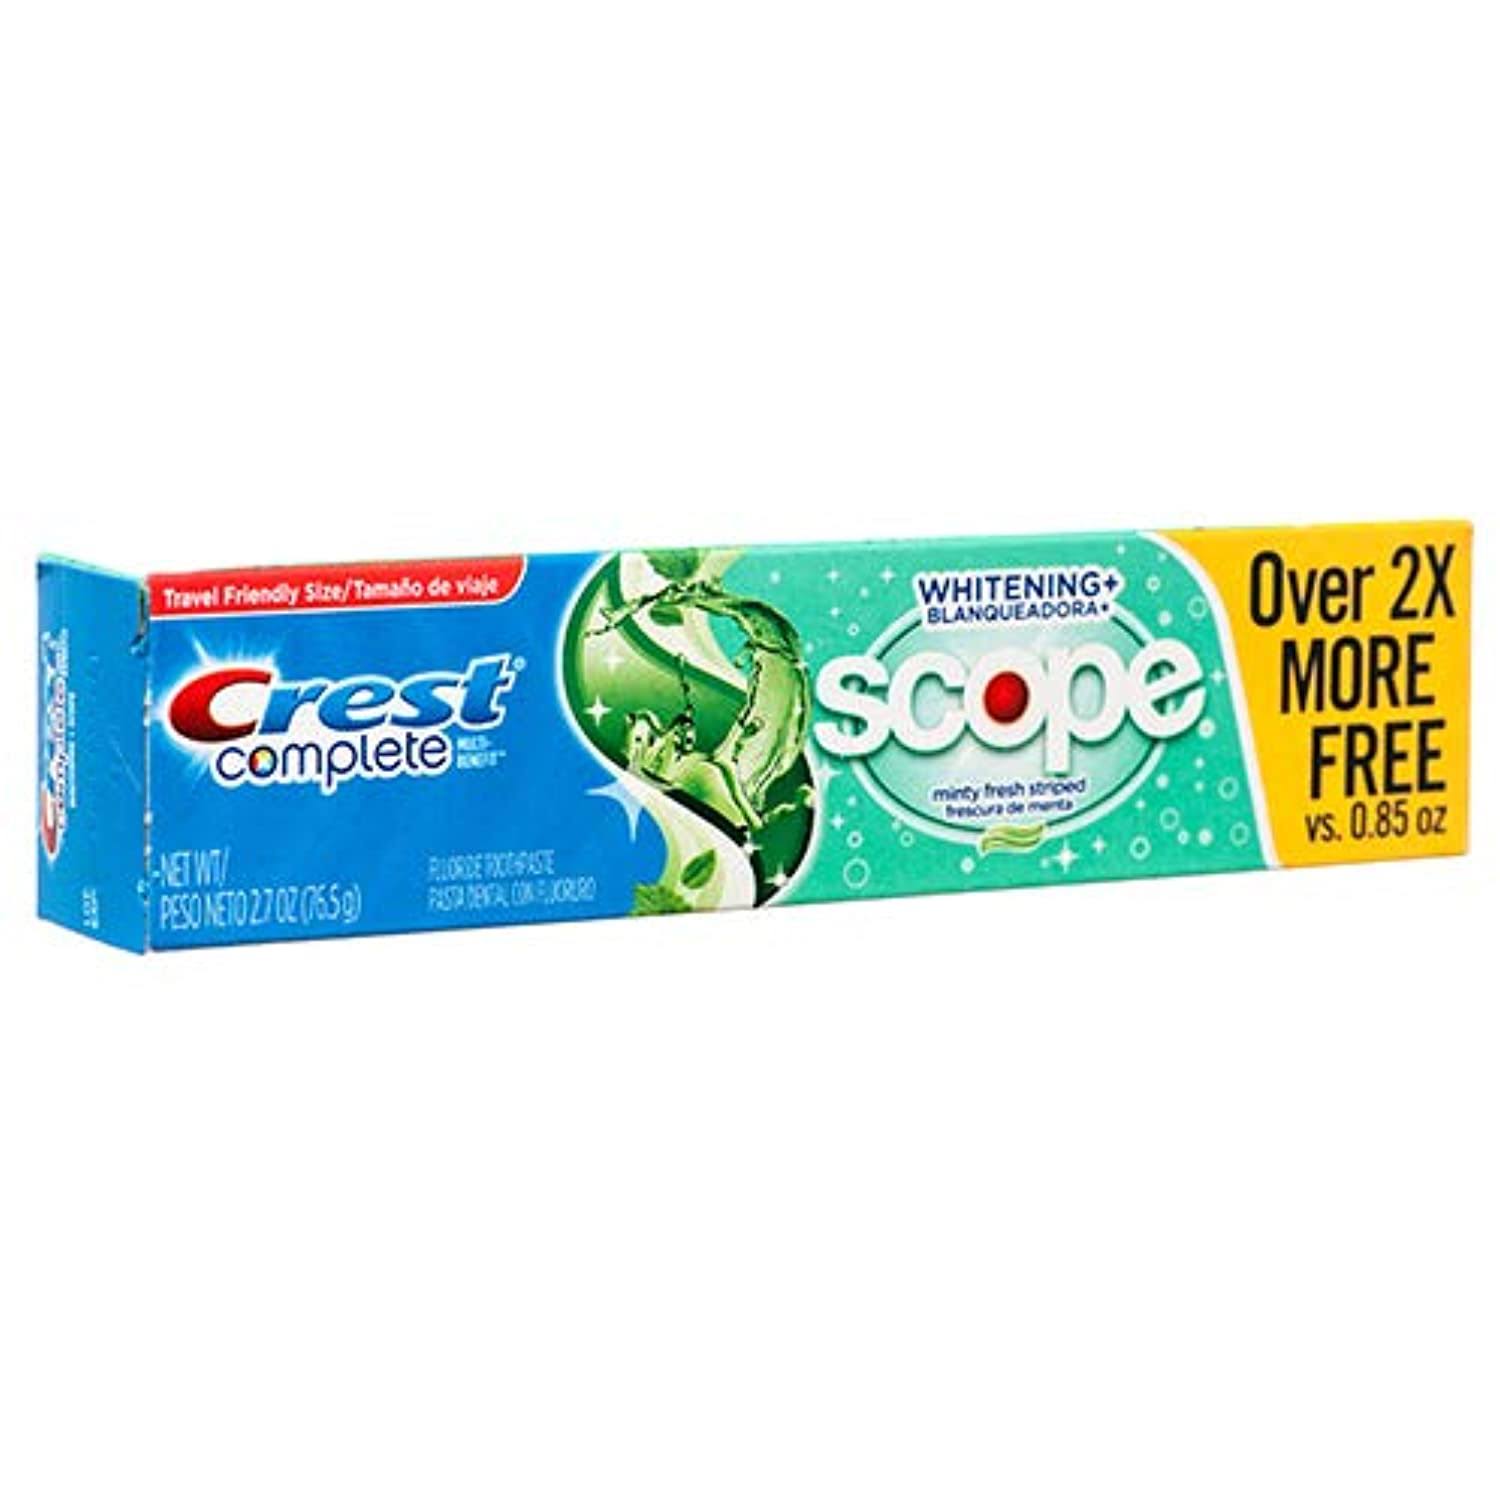 Crest Complete Multi-Benefit Whitening+ Scope Toothpaste Minty Fresh